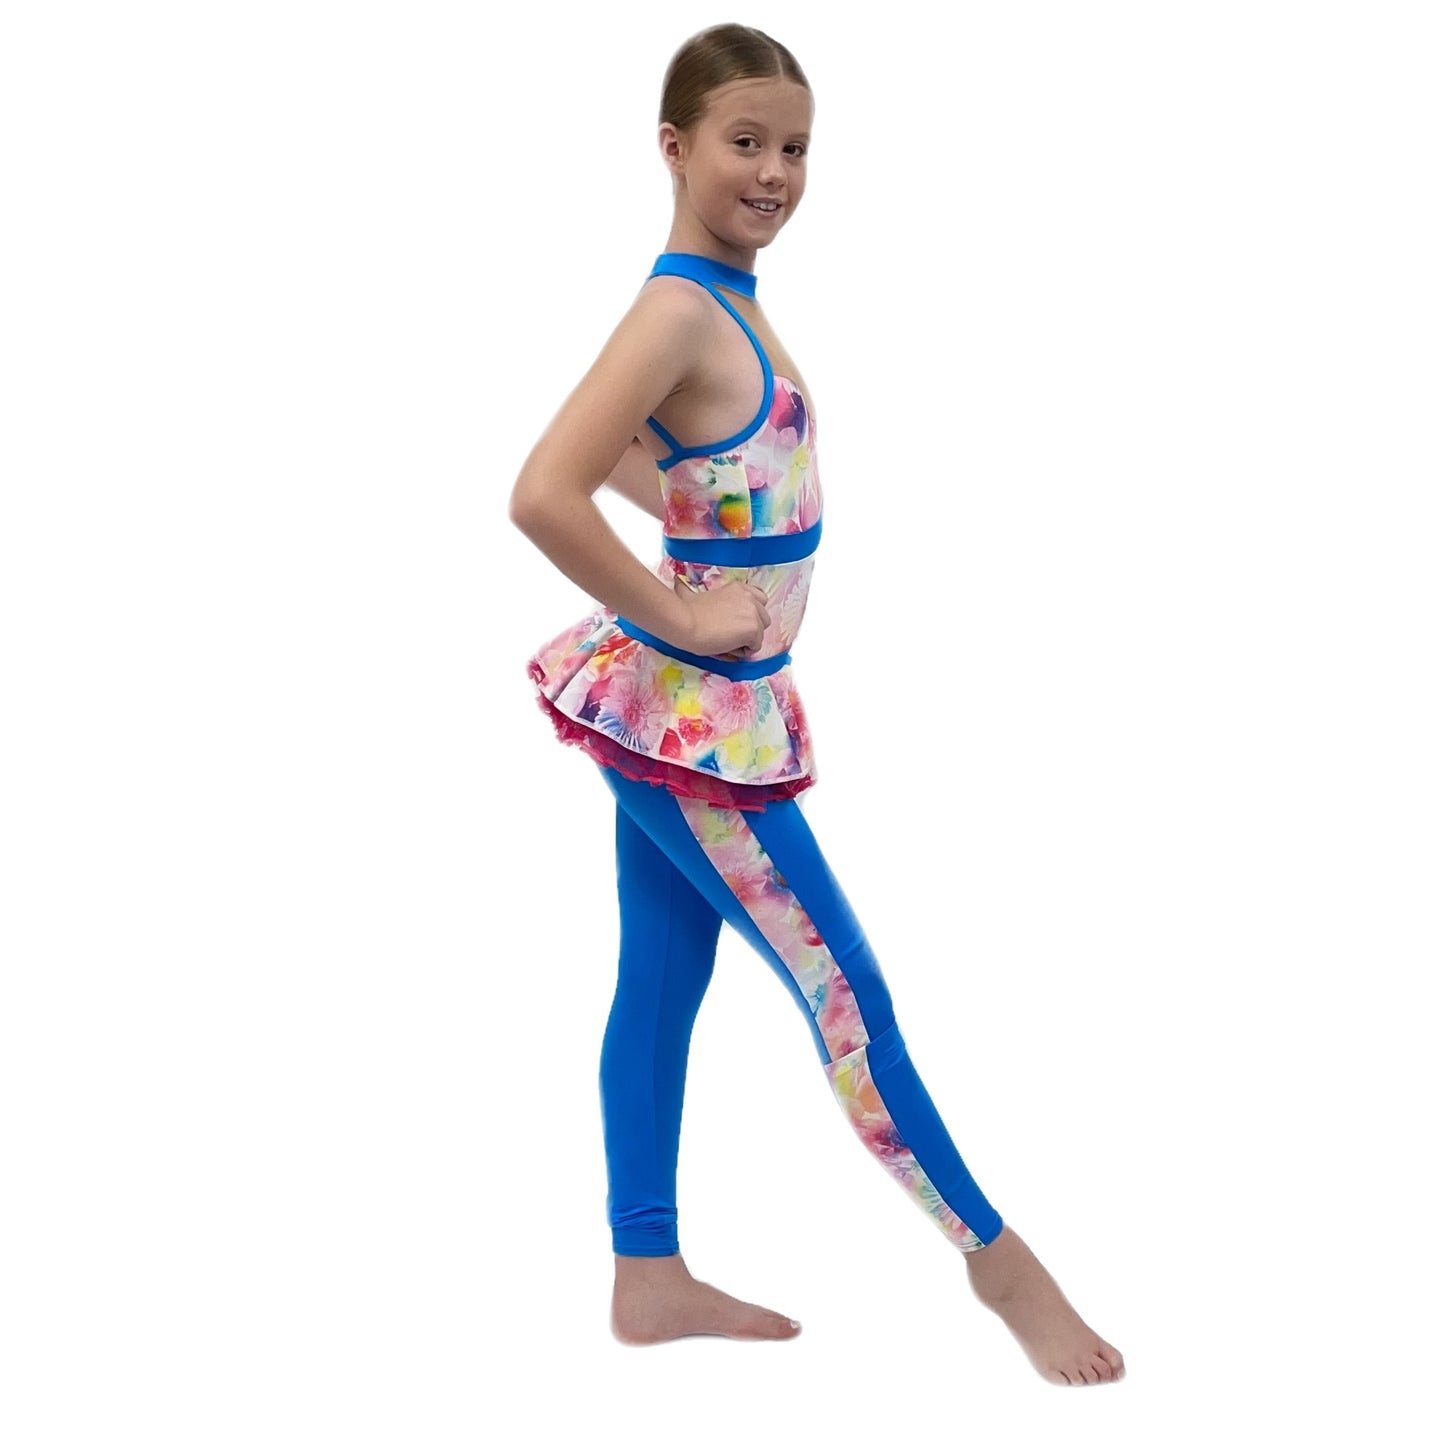 Blue/Multi Catsuit with Attached Skirt | Razzle Dazzle Dance Costumes